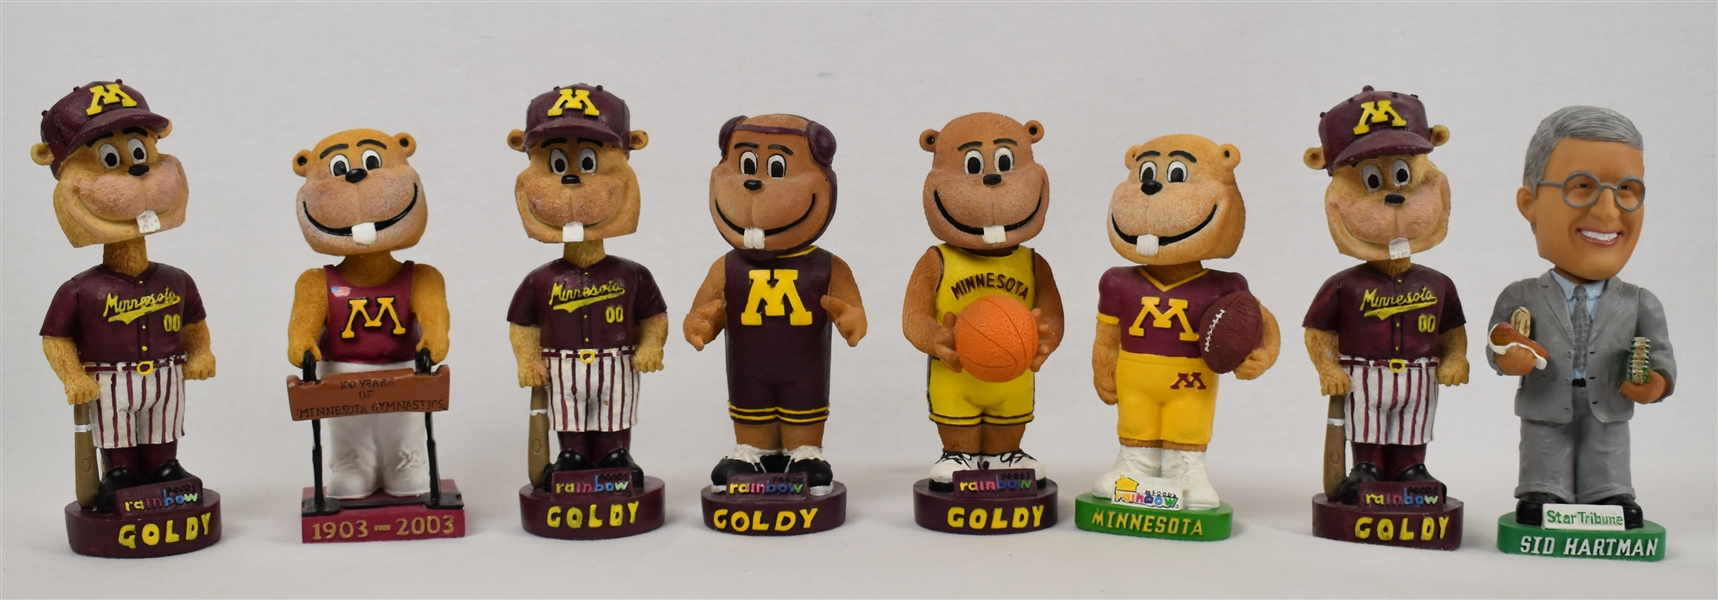 Minnesota Gophers Collection of 8 Bobbleheads 